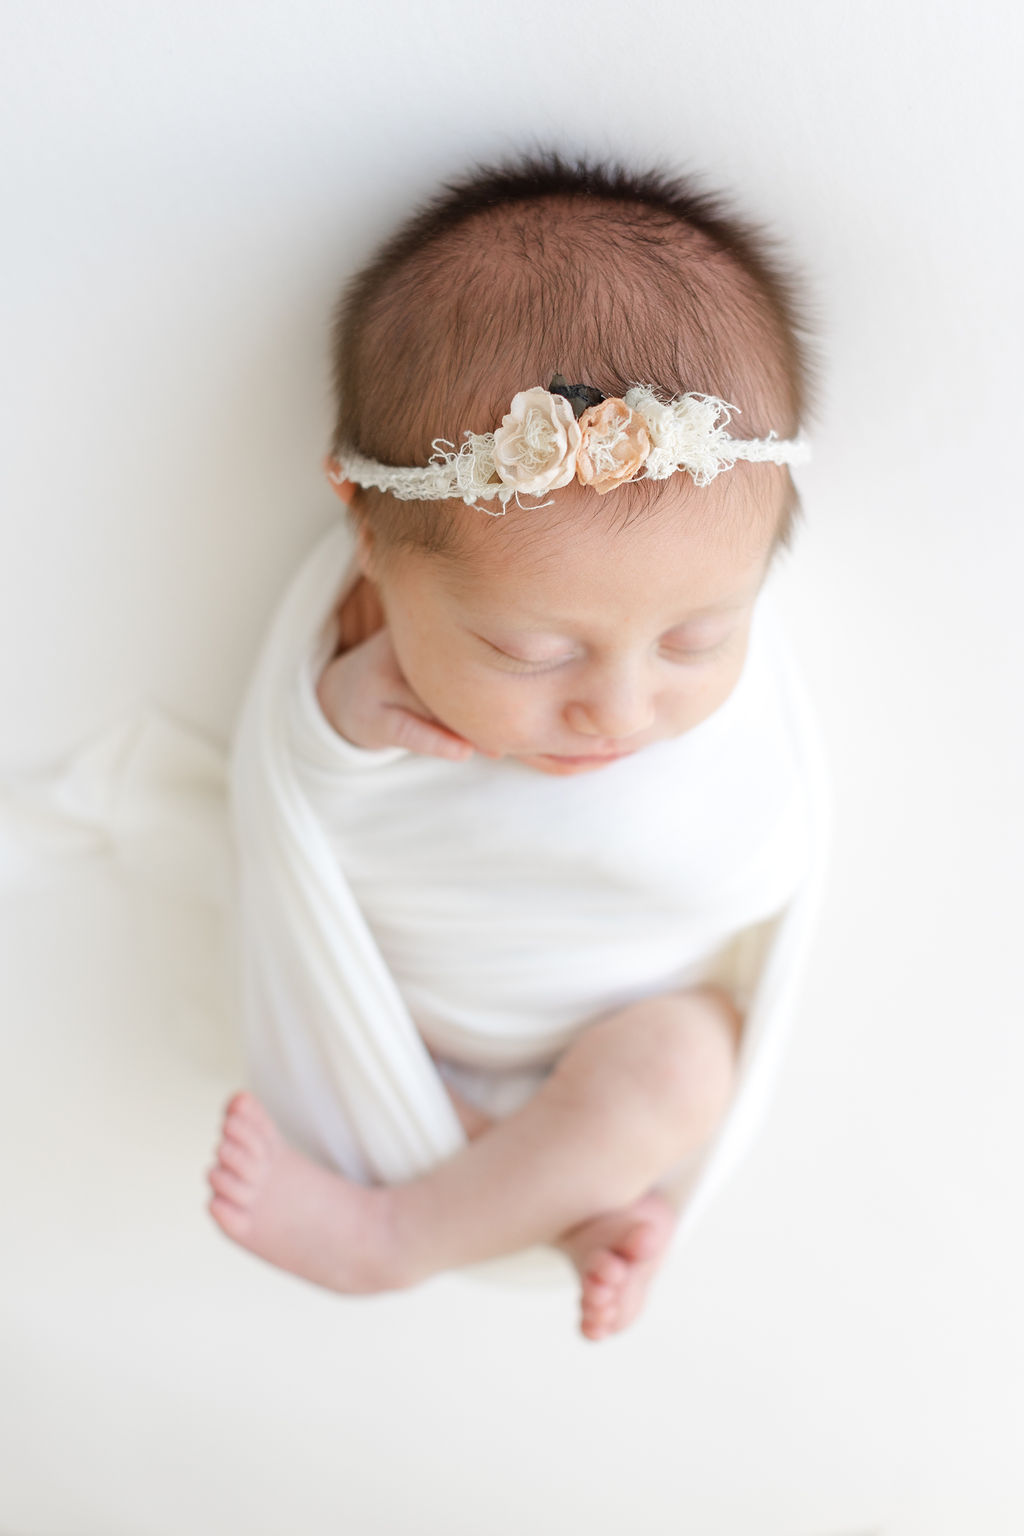 Details of a newborn baby's head with a floral headband taken by a bucks county newborn photographer